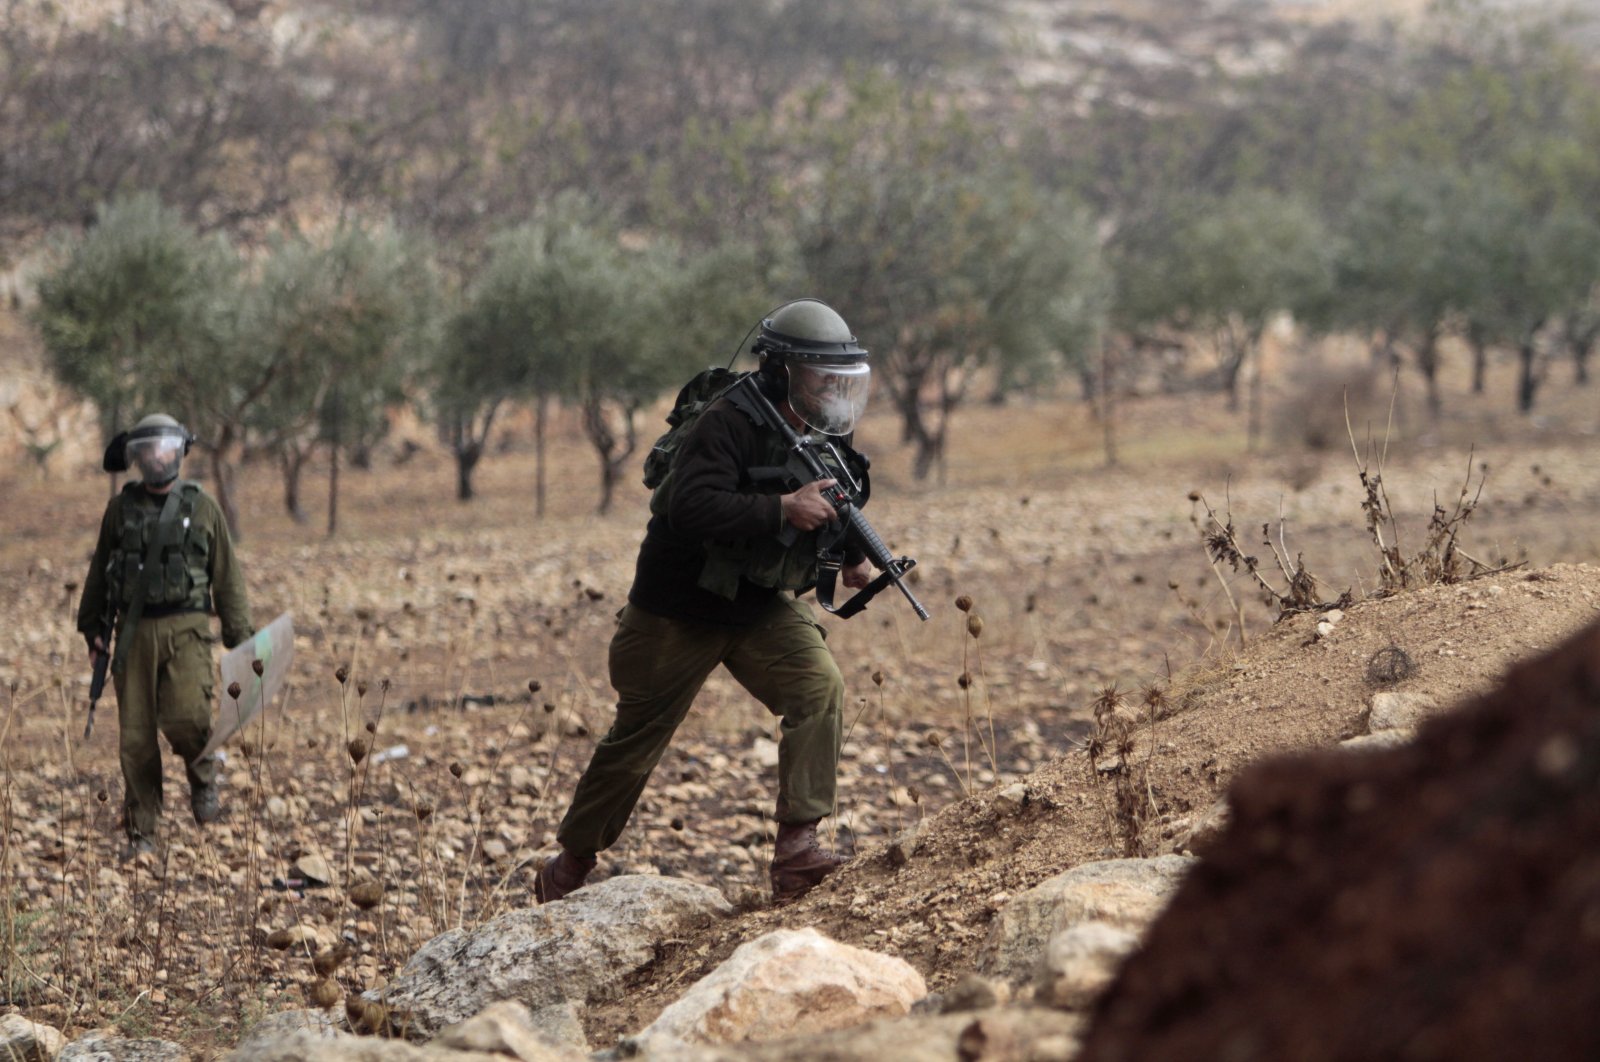 An Israeli soldier takes a position during the demonstration against Israeli settlements in the village of Beit Dajan, in the West Bank, Palestine, Nov. 19, 2021. (Photo by Getty Images)